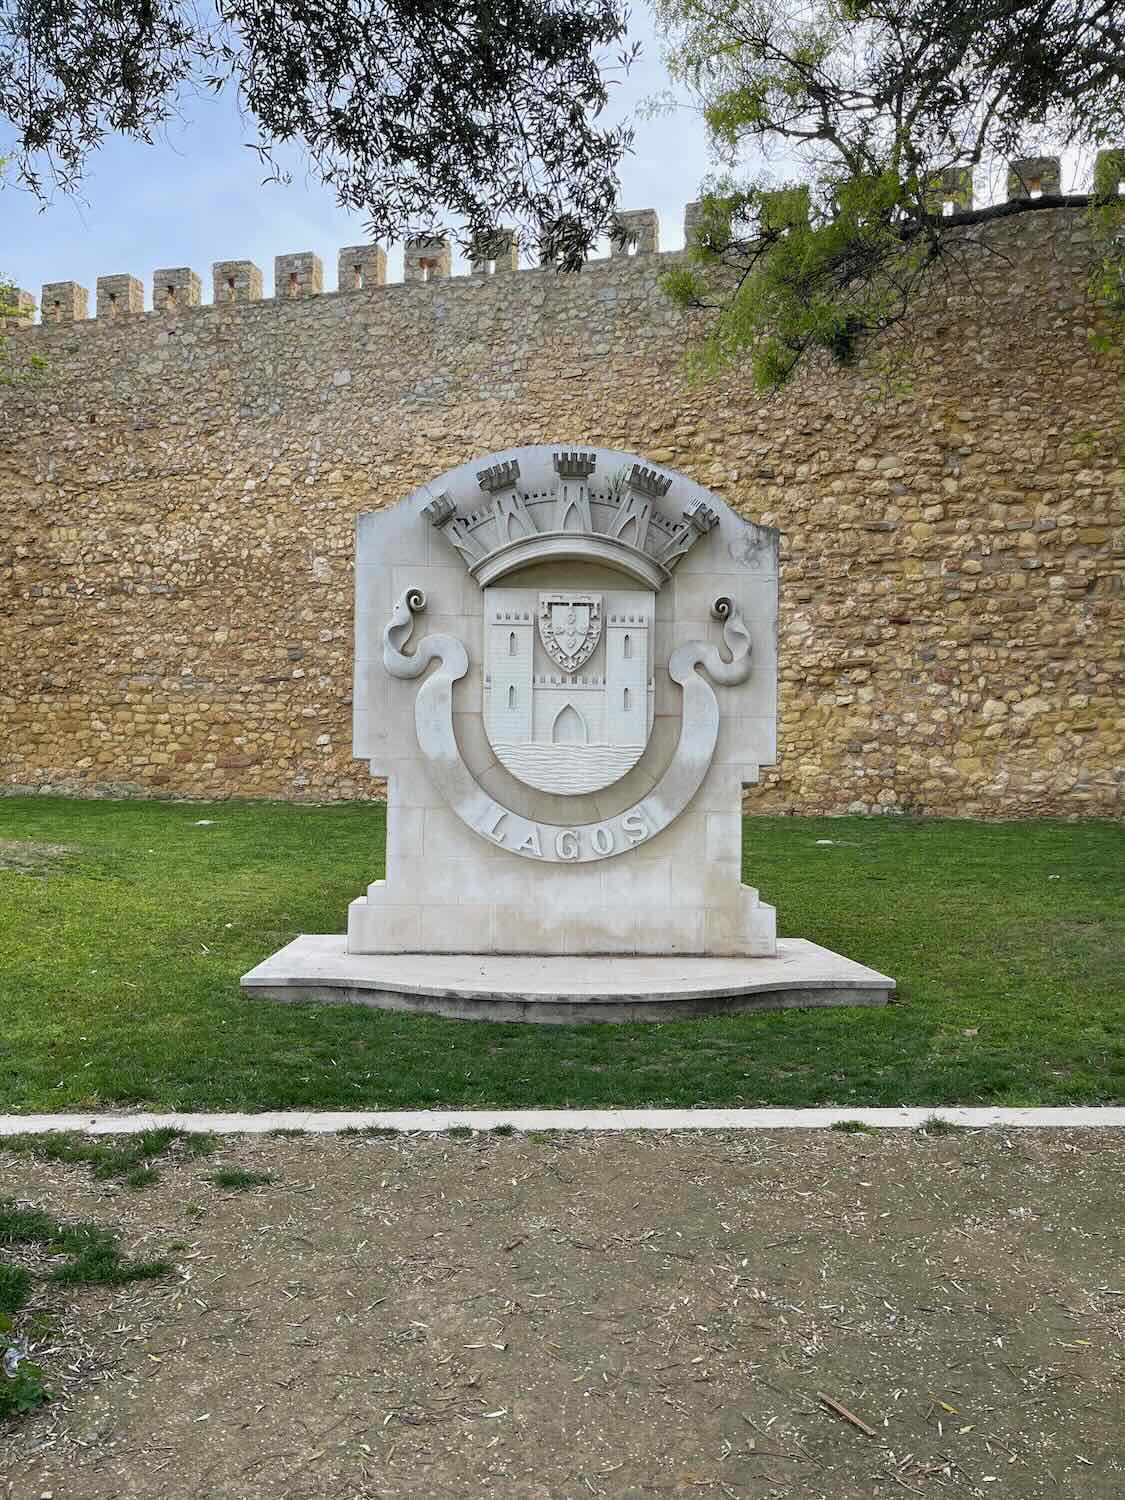 A large stone emblem featuring the word "Lagos" and a crest with a castle. The emblem is set against a backdrop of an ancient stone wall and surrounded by green grass.